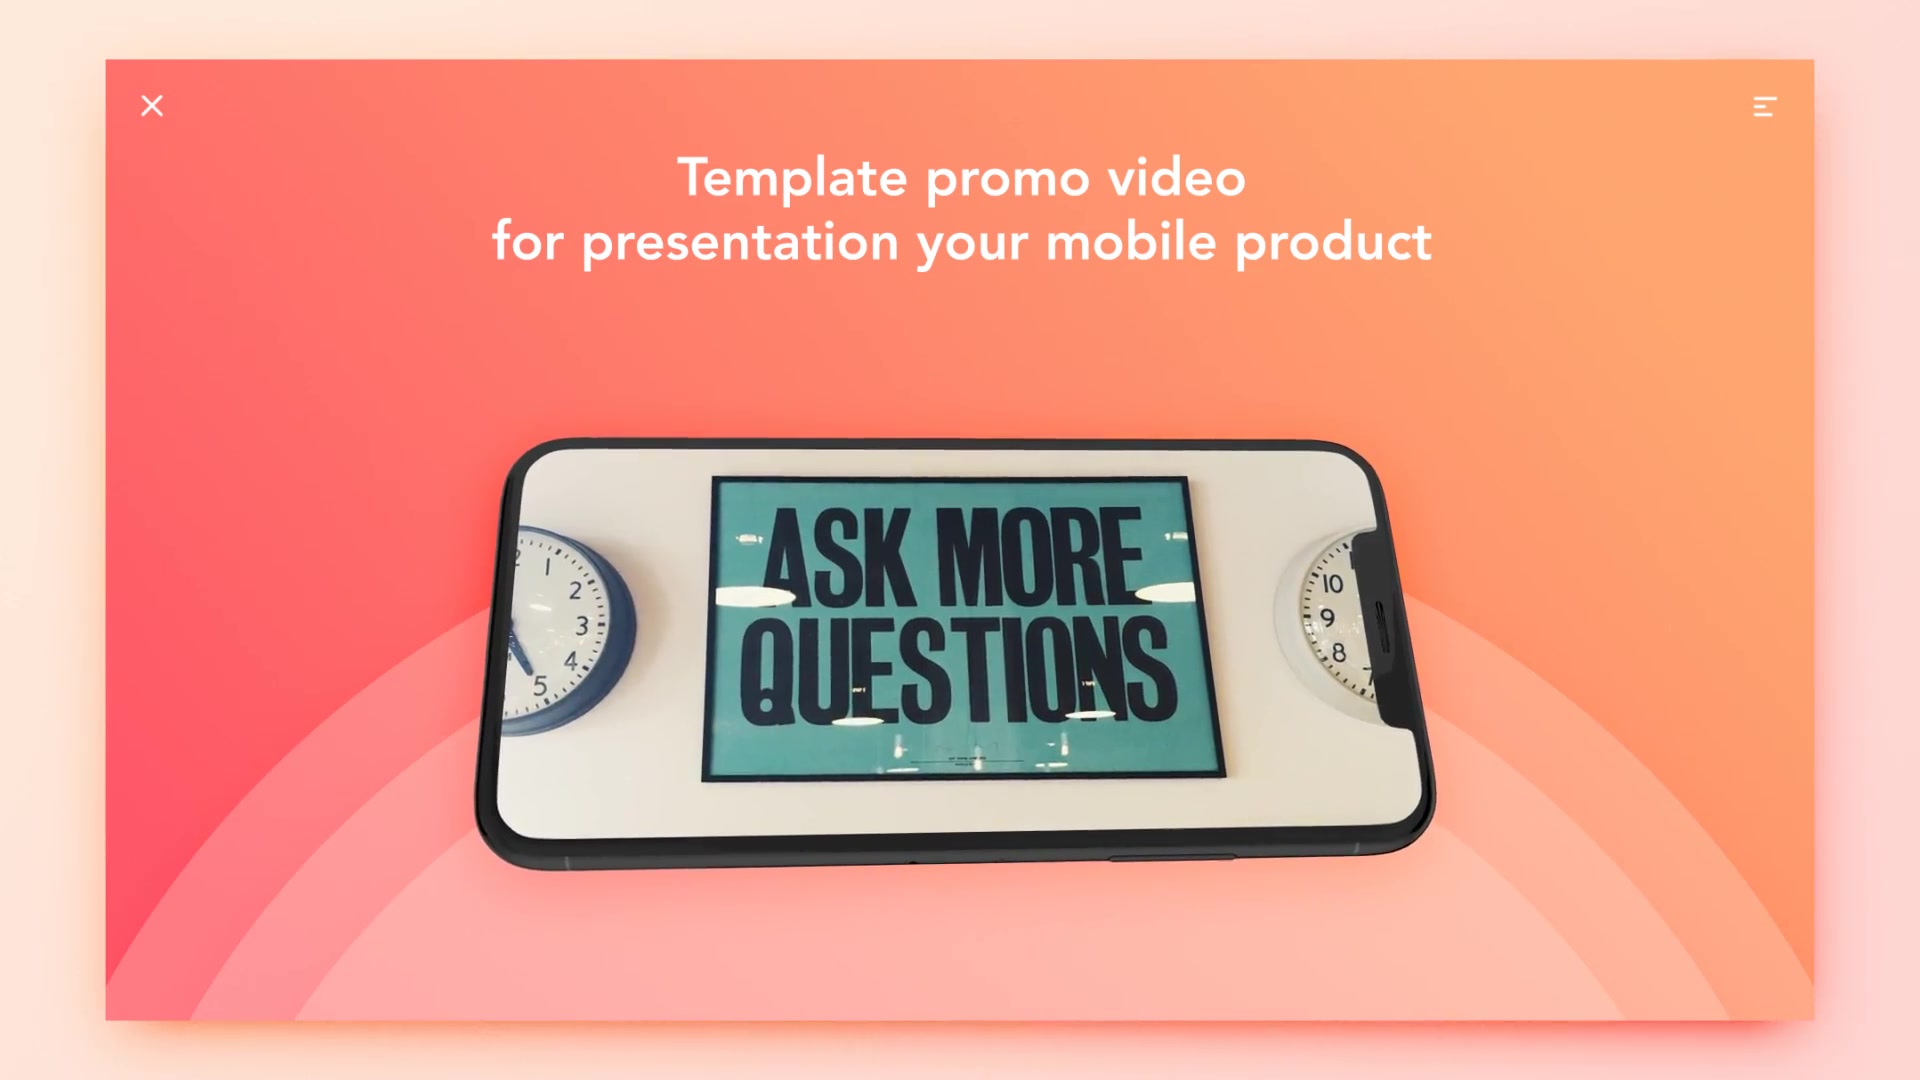 Mobile Product Promo - Download Videohive 21539123